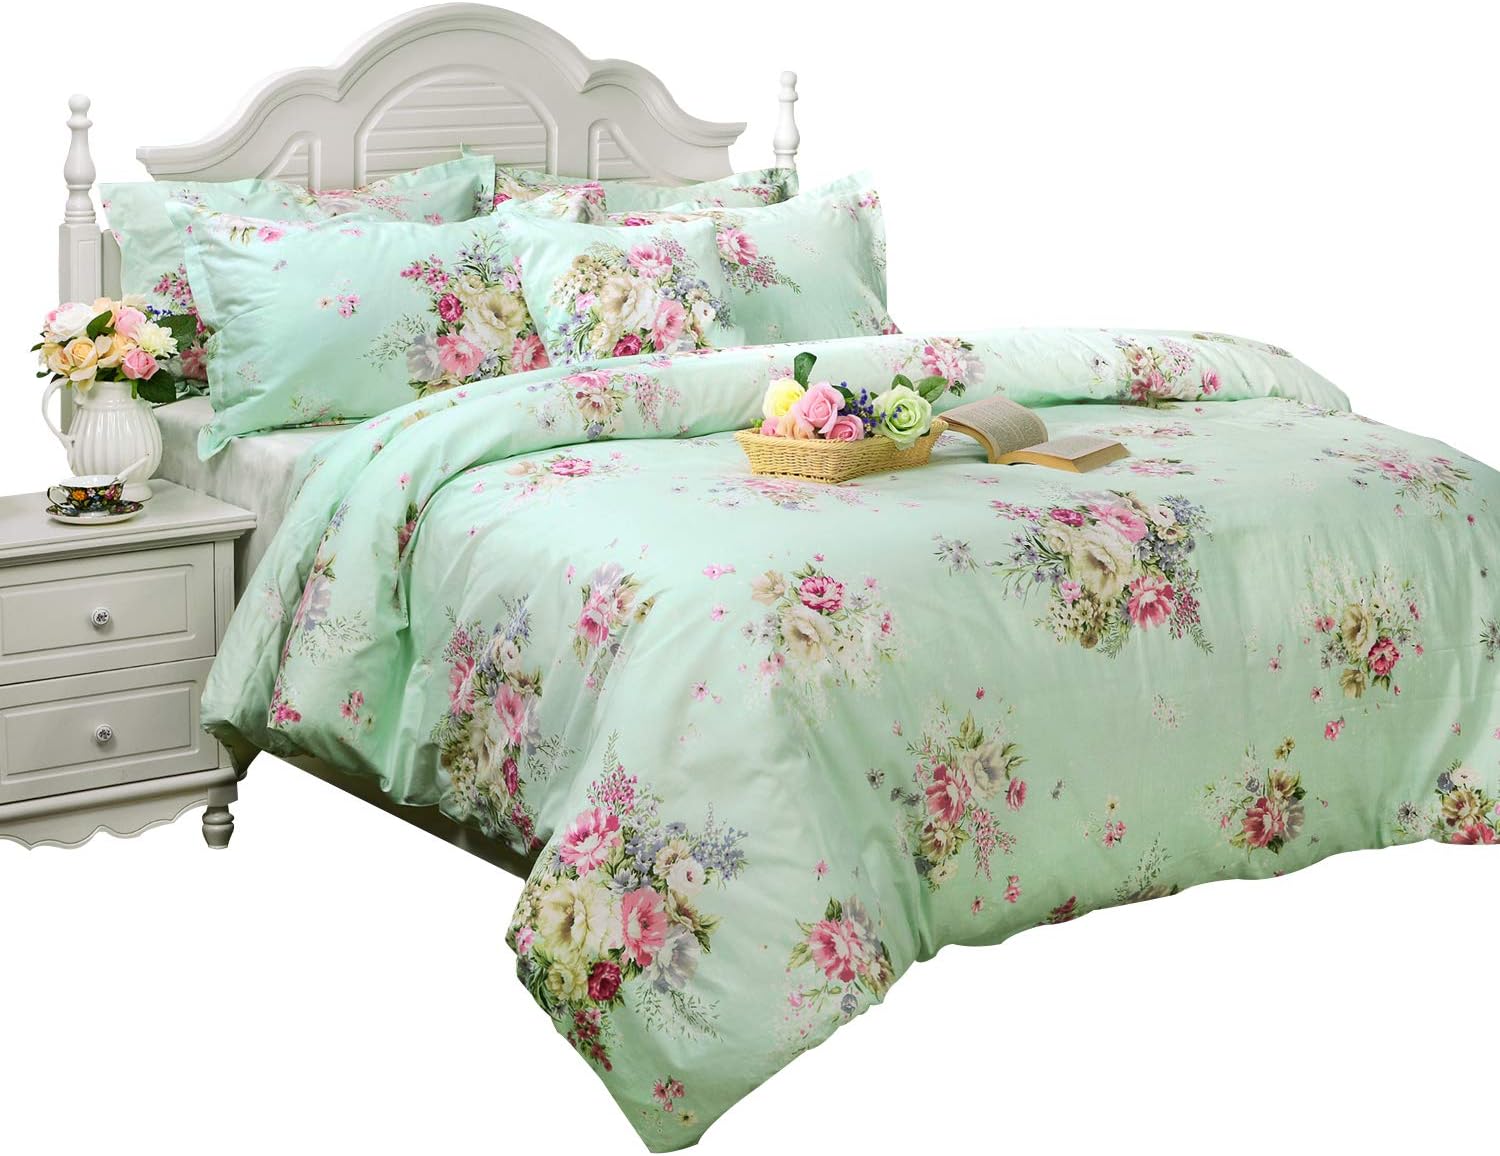 FADFAY Green Floral Duvet Cover Sets Vintage Flower Printed Bedding Ultra Soft 100% Cotton Designer Bedding Set 3 Pieces, 1duvet Cover & 2pillowcases (Twin Size, Simple Style)